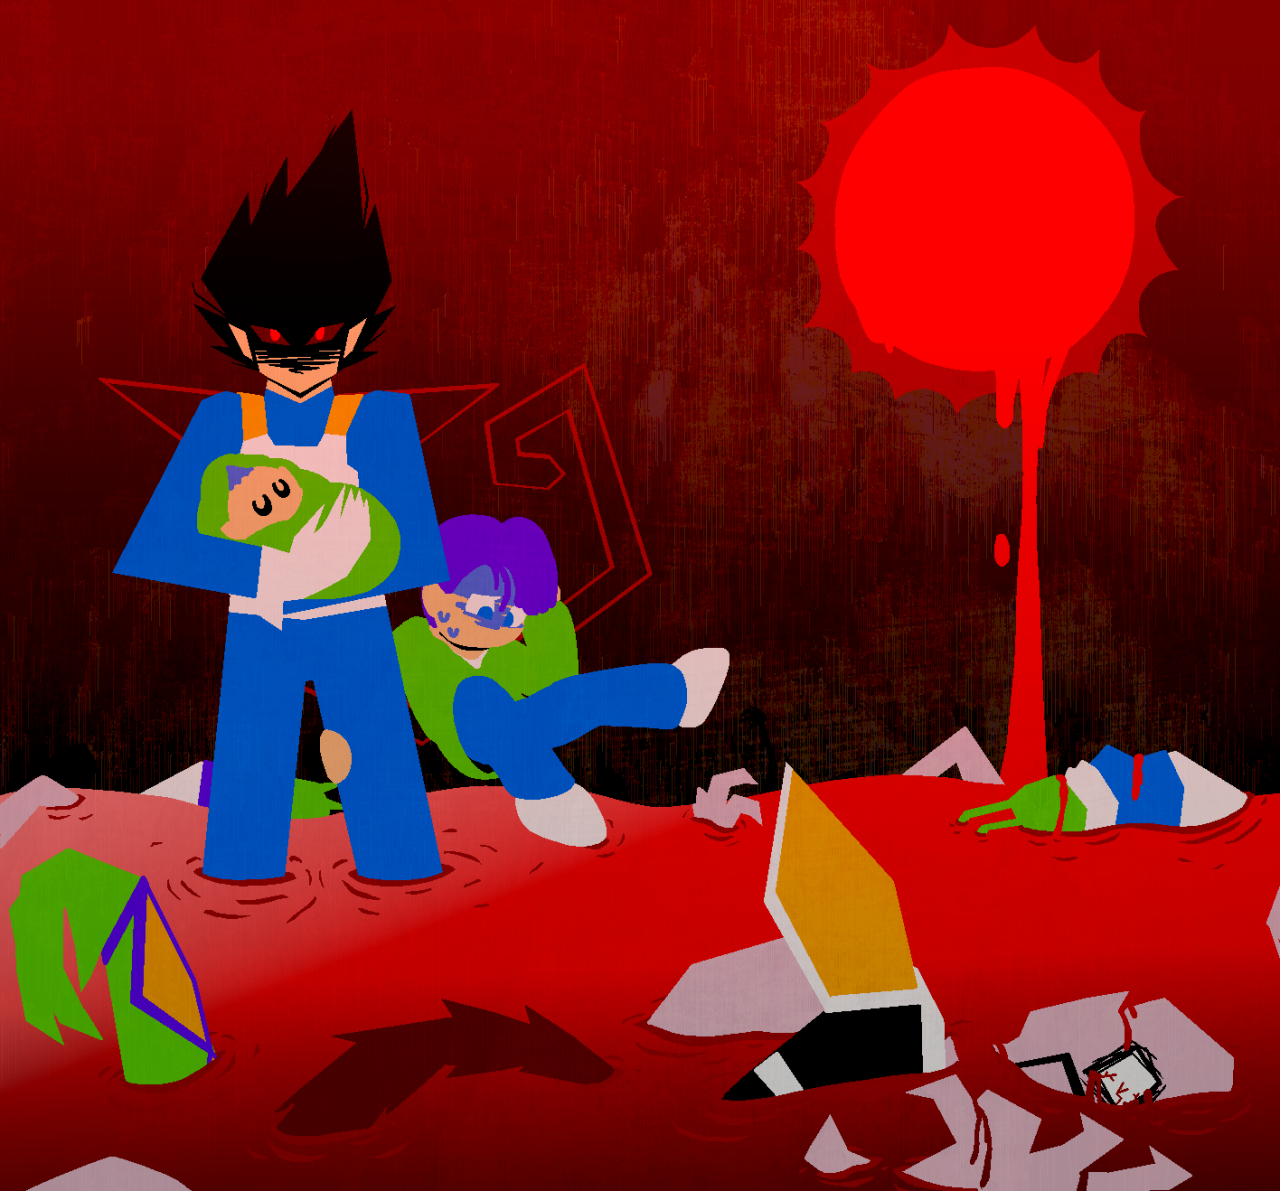 vegeta standing in a sea of blood, his face shadowed to only show red eyes glaring at the viewer. in his arms he is holding bulla who is sleeping peacefully, and clinging to his leg is kid trunks, who is staring down at the sea of blood with a frightened expression and hovering above it as to not fall in. behind them, a red sun appears to bleed into the ocean, which is filled with various corpses (including a couple namekians, one of which being a child, and, in the foreground, there is the corpse of nappa.) behind vegeta, jagged red lines imply the shape of his long-gone tail and the shoulder pads of his old armor.